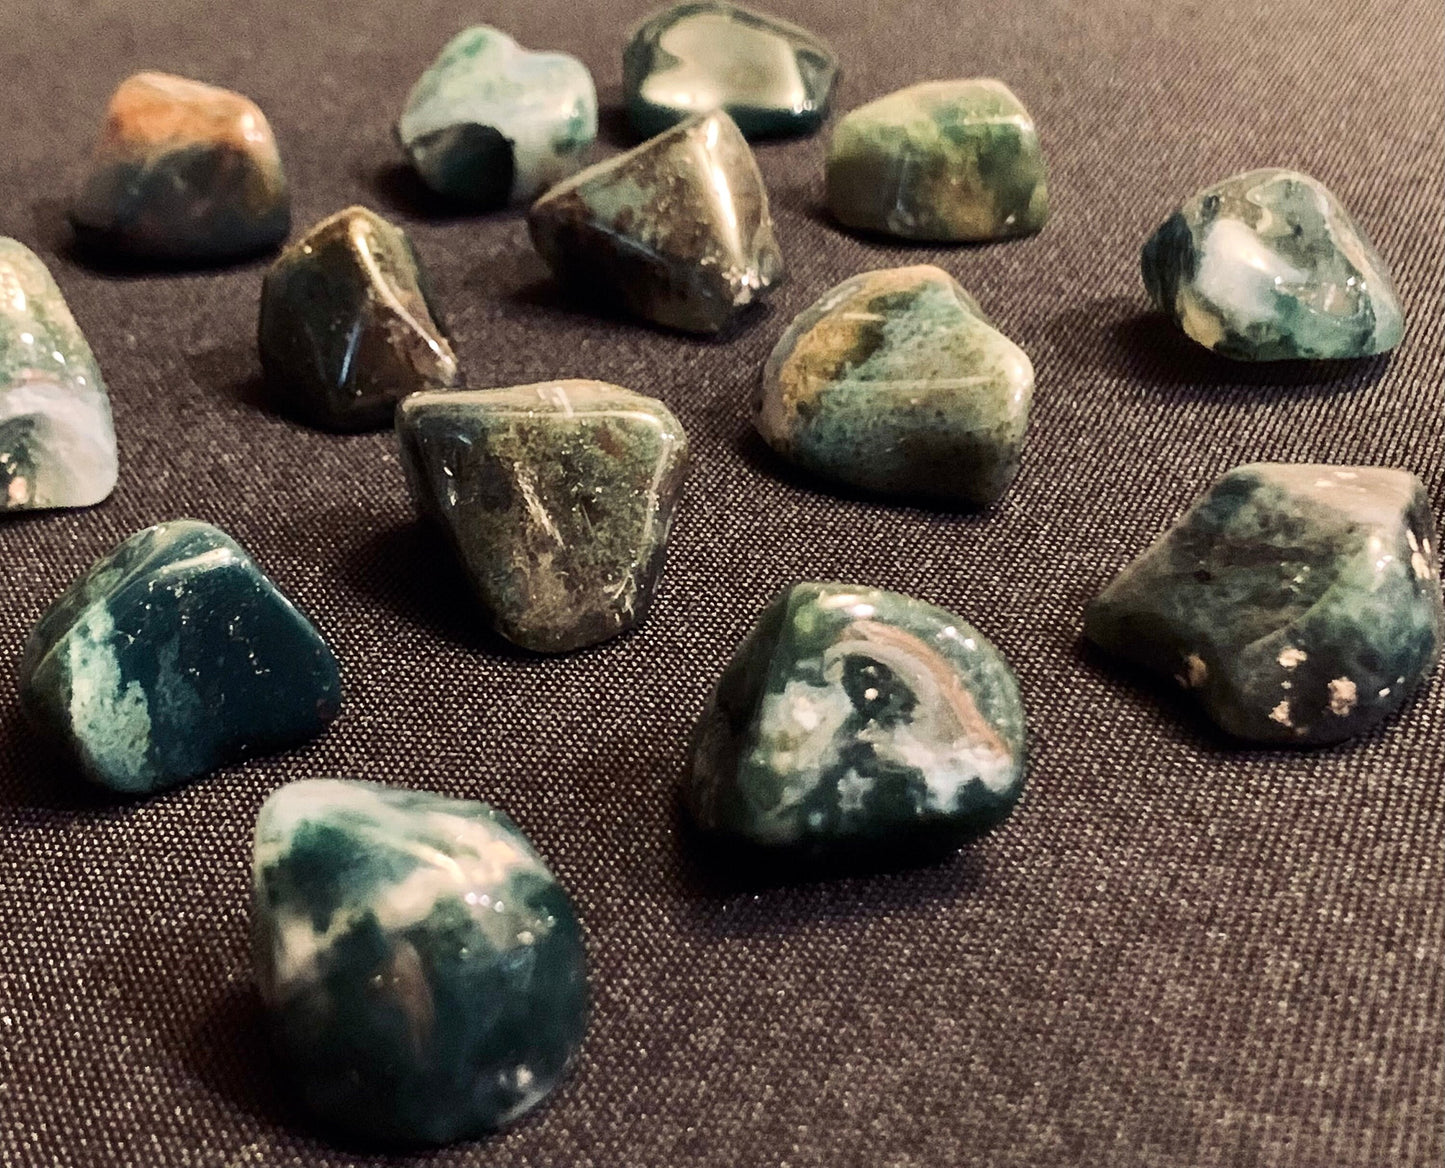 Green Moss Agate Tumbled Polished Stones Natural Crystal Gemstones